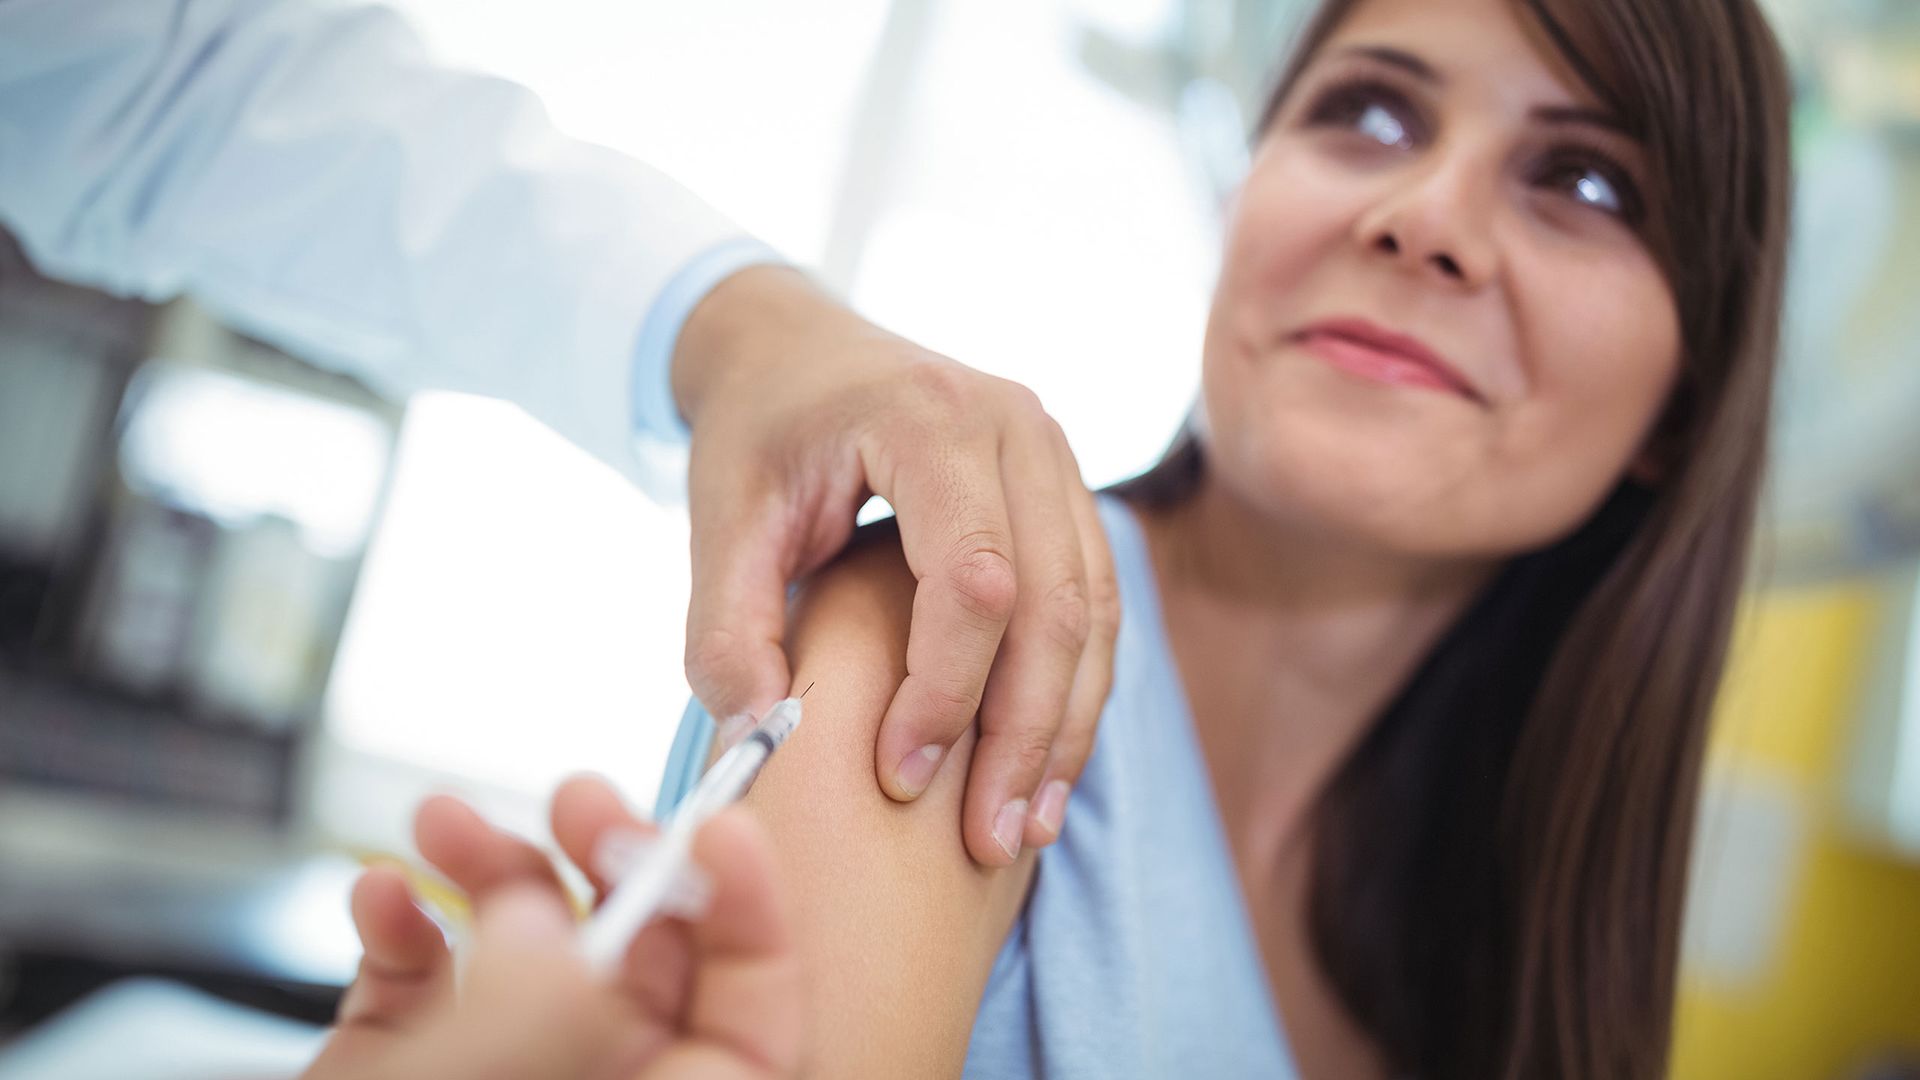 5 Reasons to Talk to Your Doctor About Shingles